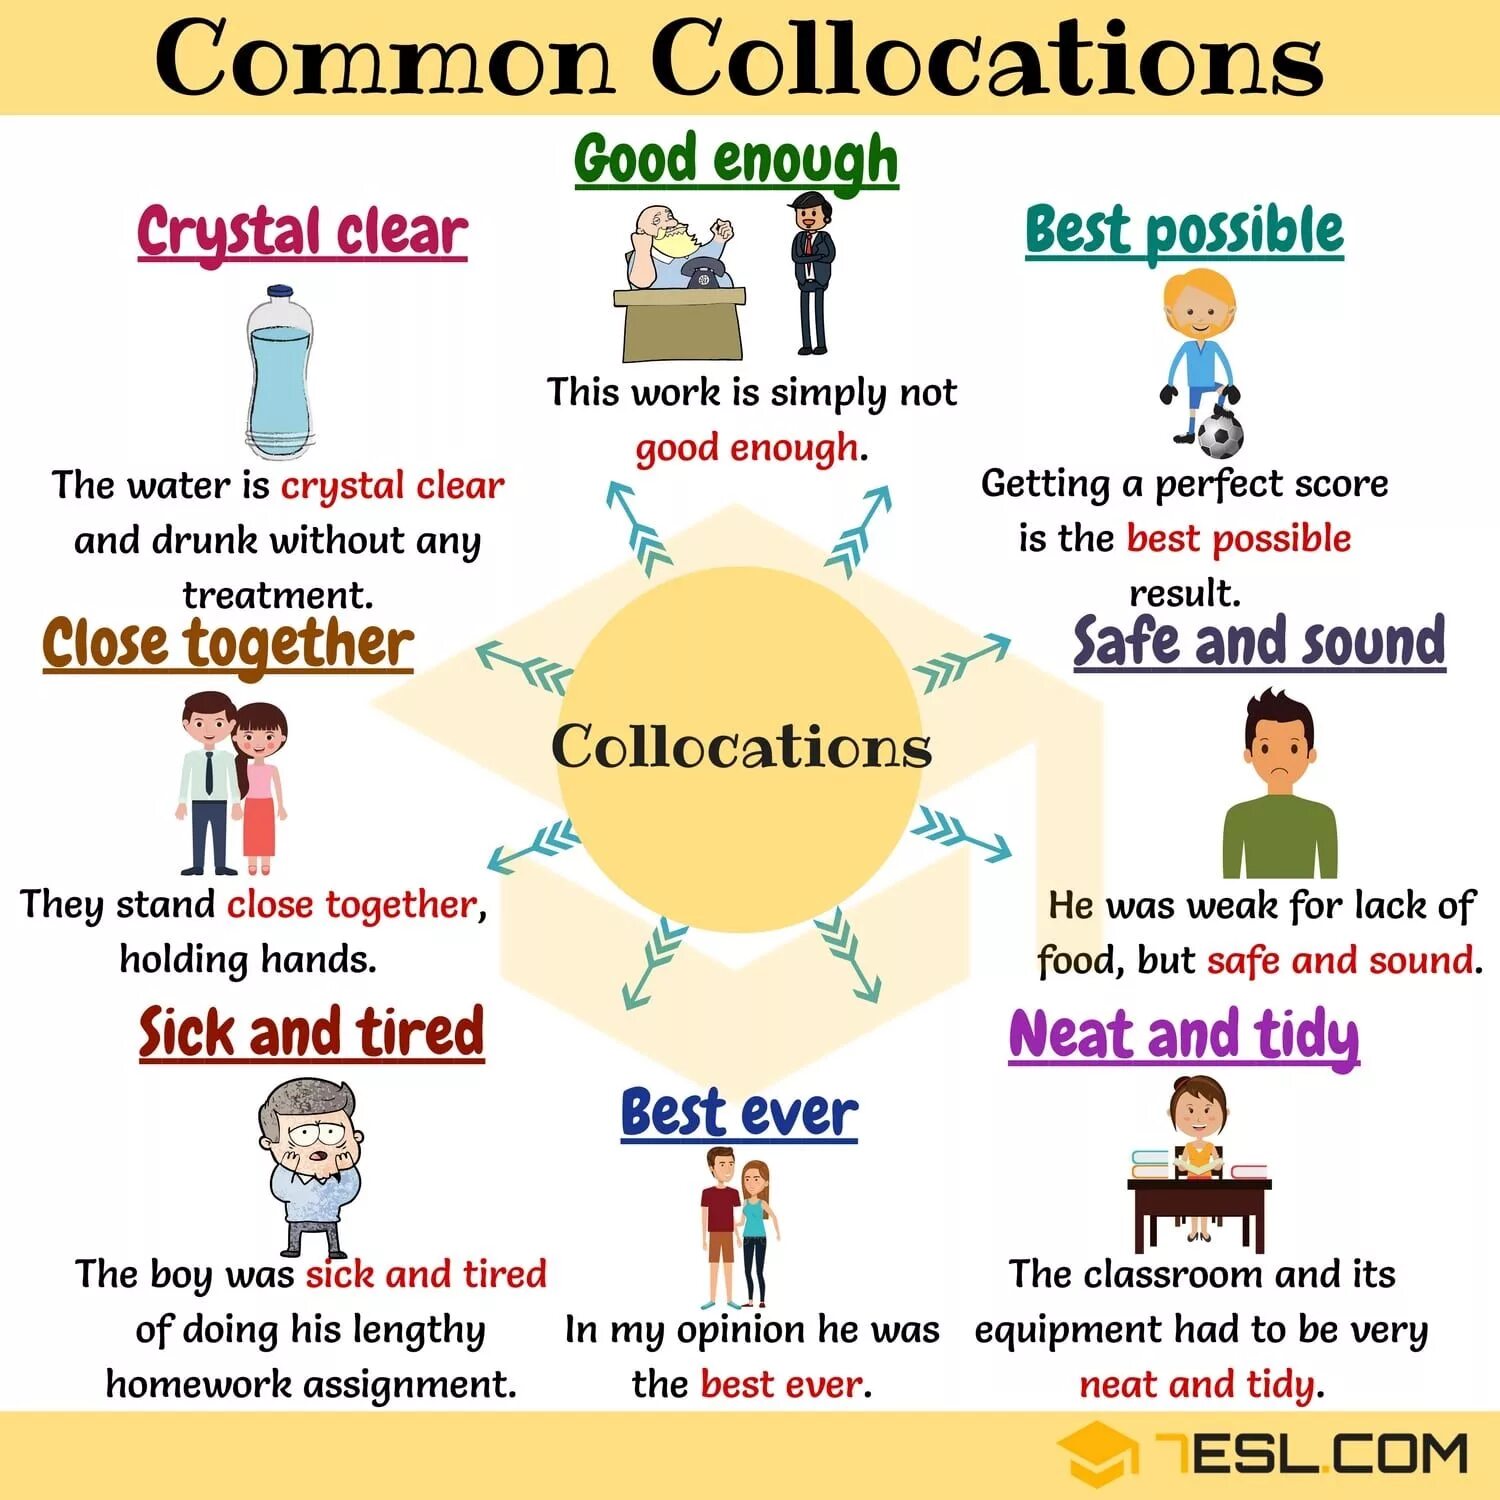 Without using words. English collocations. Colocation в английском. Collocations в английском языке. Коллокация это в английском.